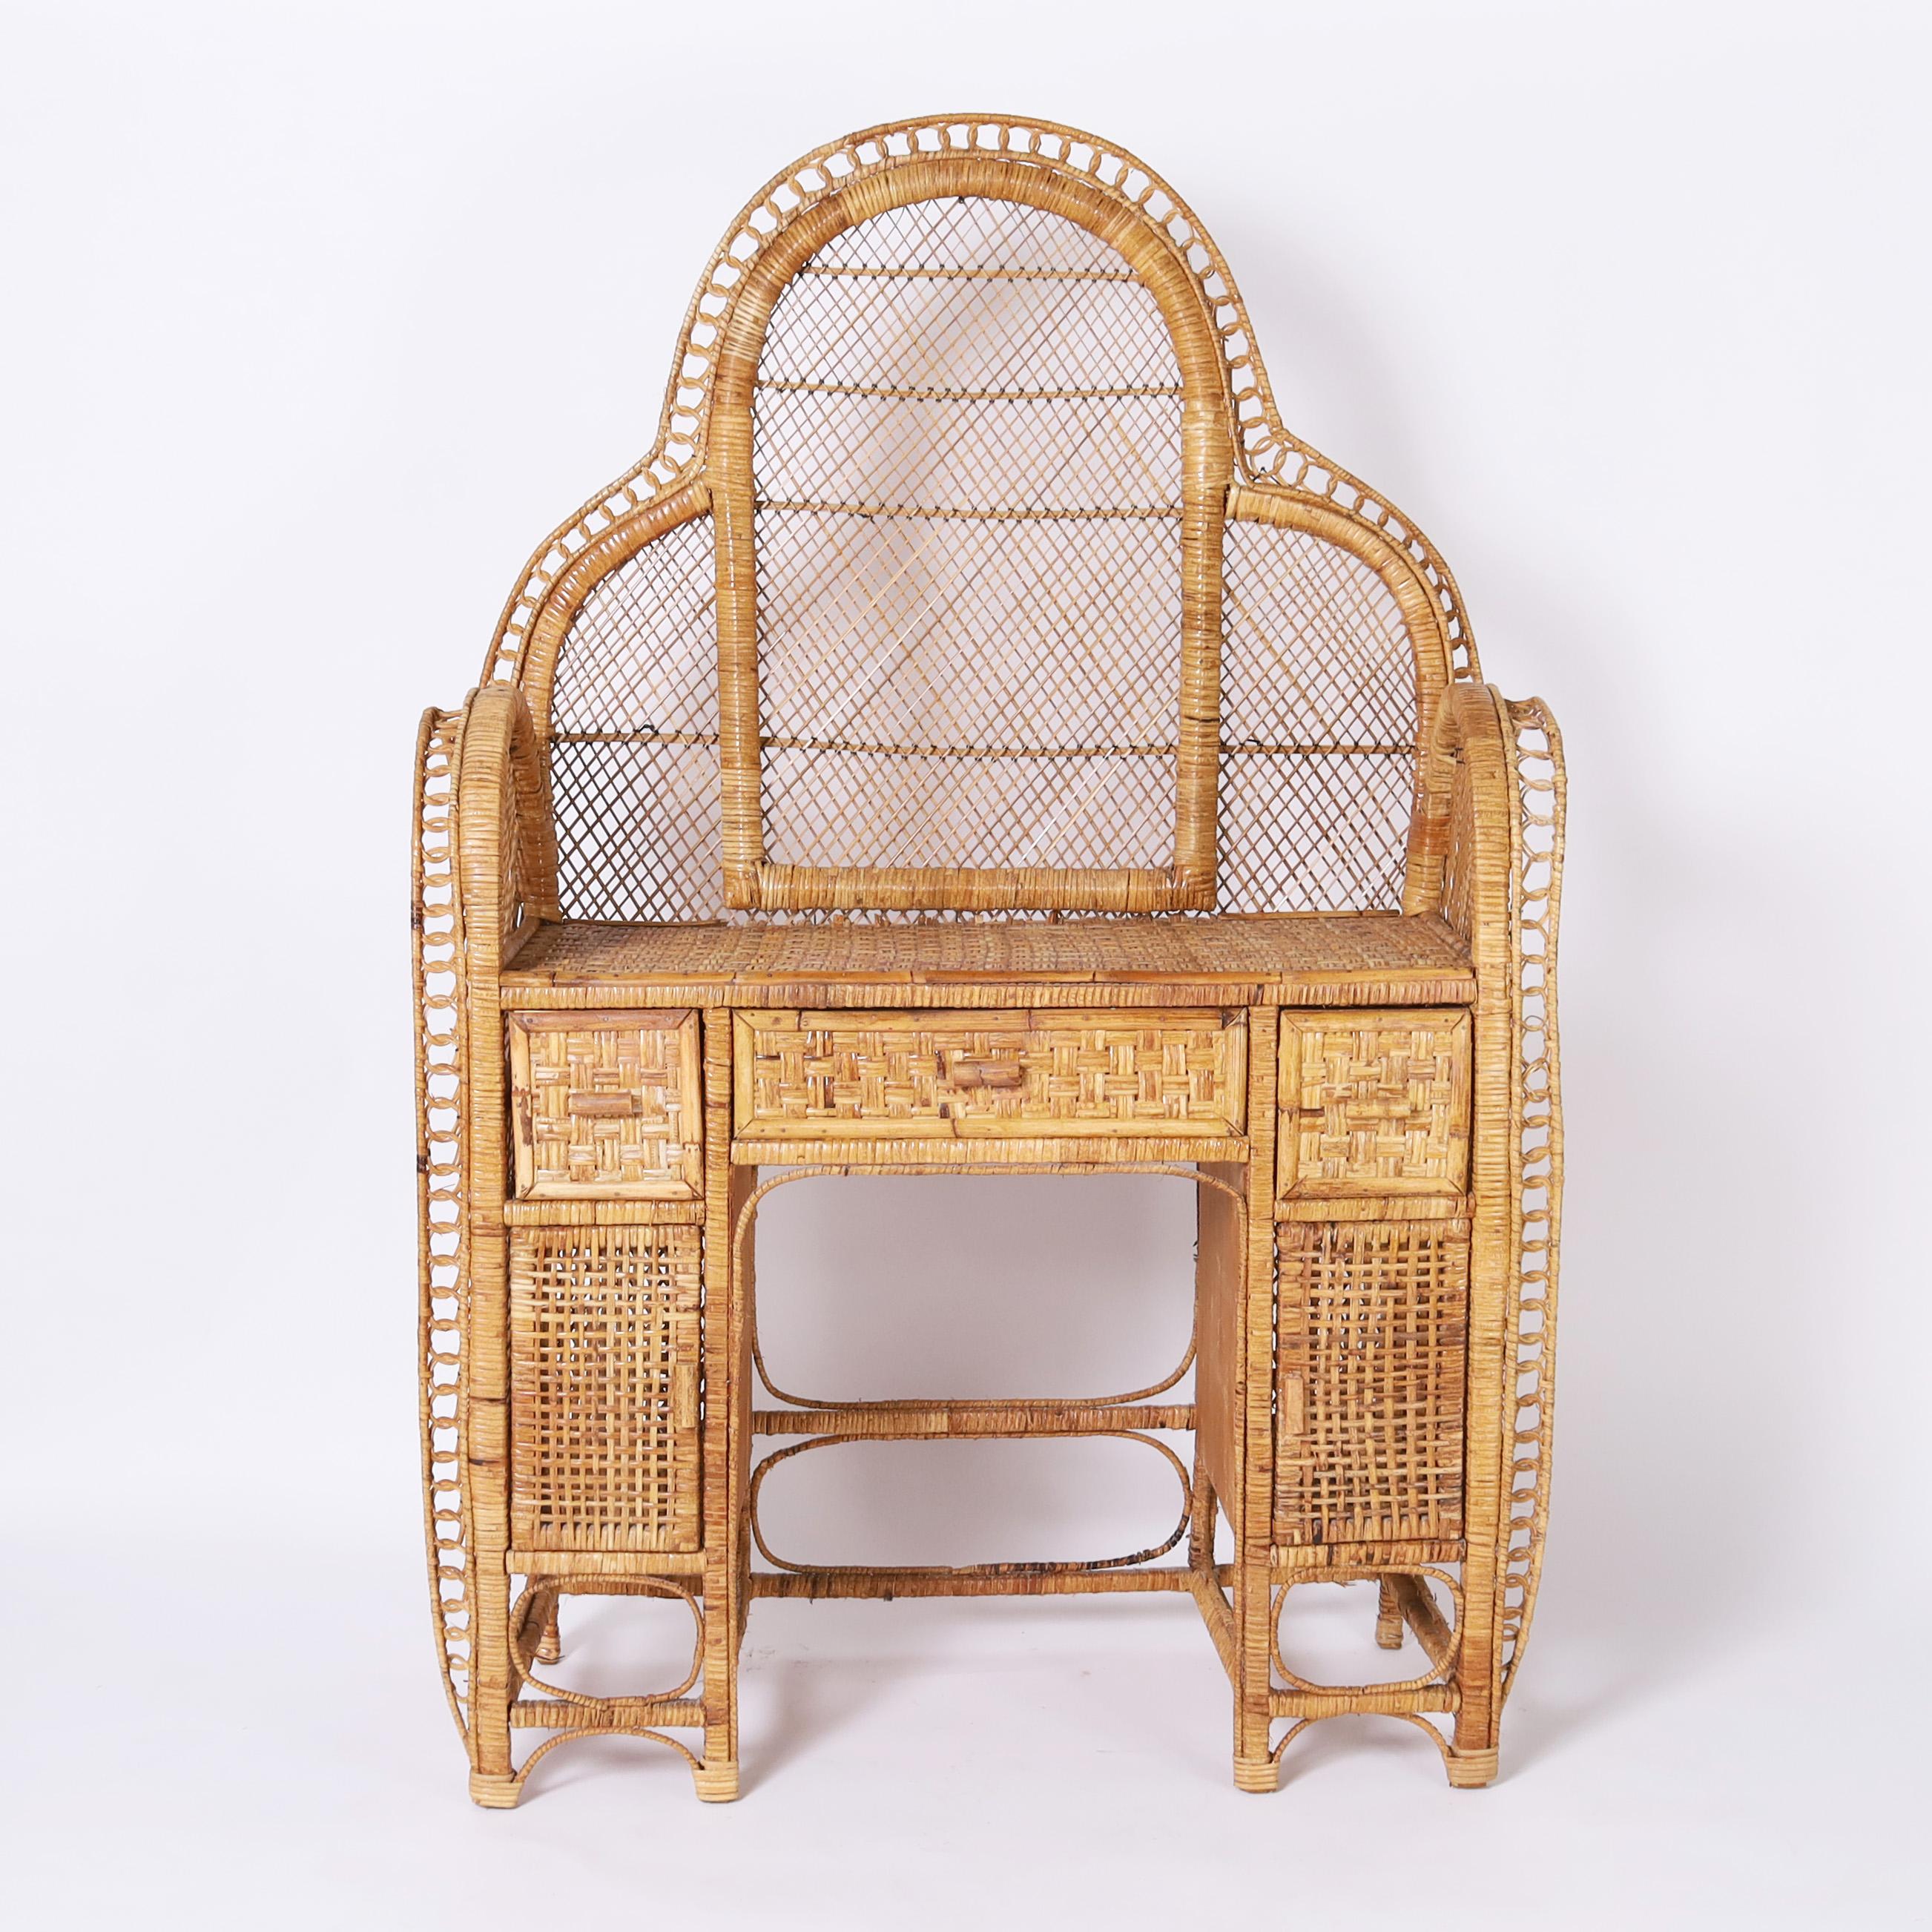 Rare and unusual vintage Anglo Indian vanity handcrafted in a stylized peacock form with wicker sides and back having a woven rattan top, drawers fronts, and cabinet doors. 

Kneehole measures 23